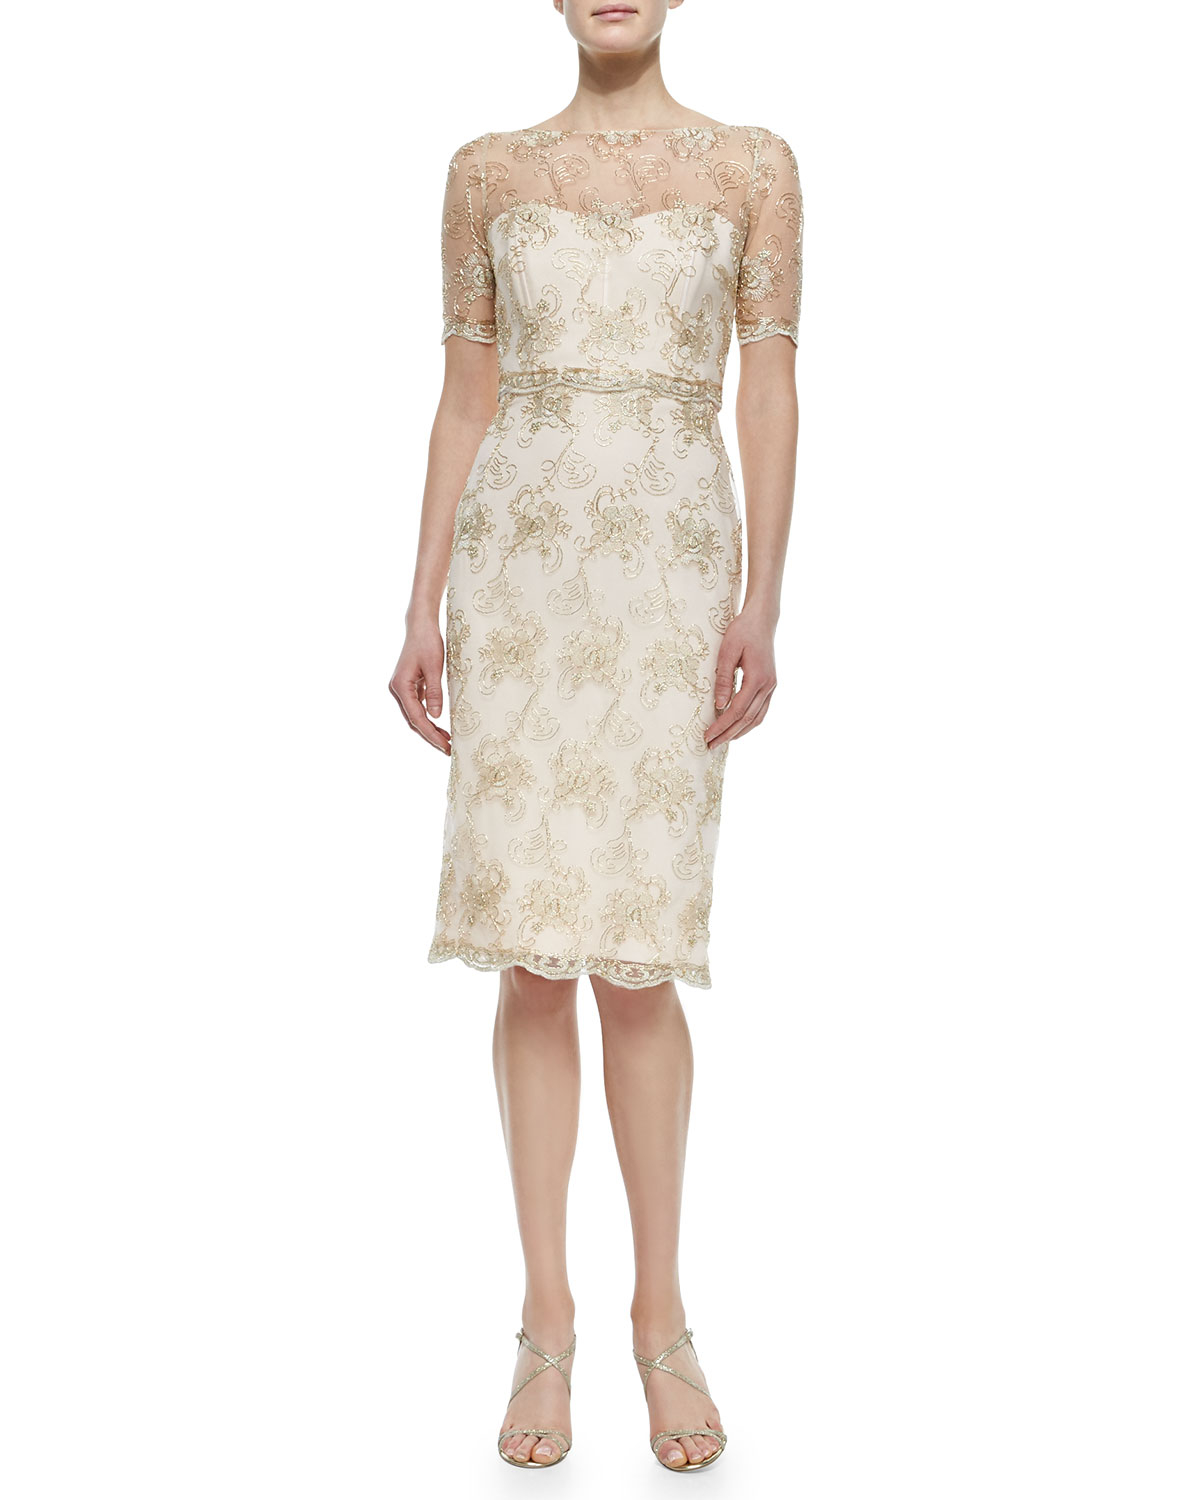 Lyst - Badgley mischka Short-sleeve Lace Illusion Cocktail Dress in Pink